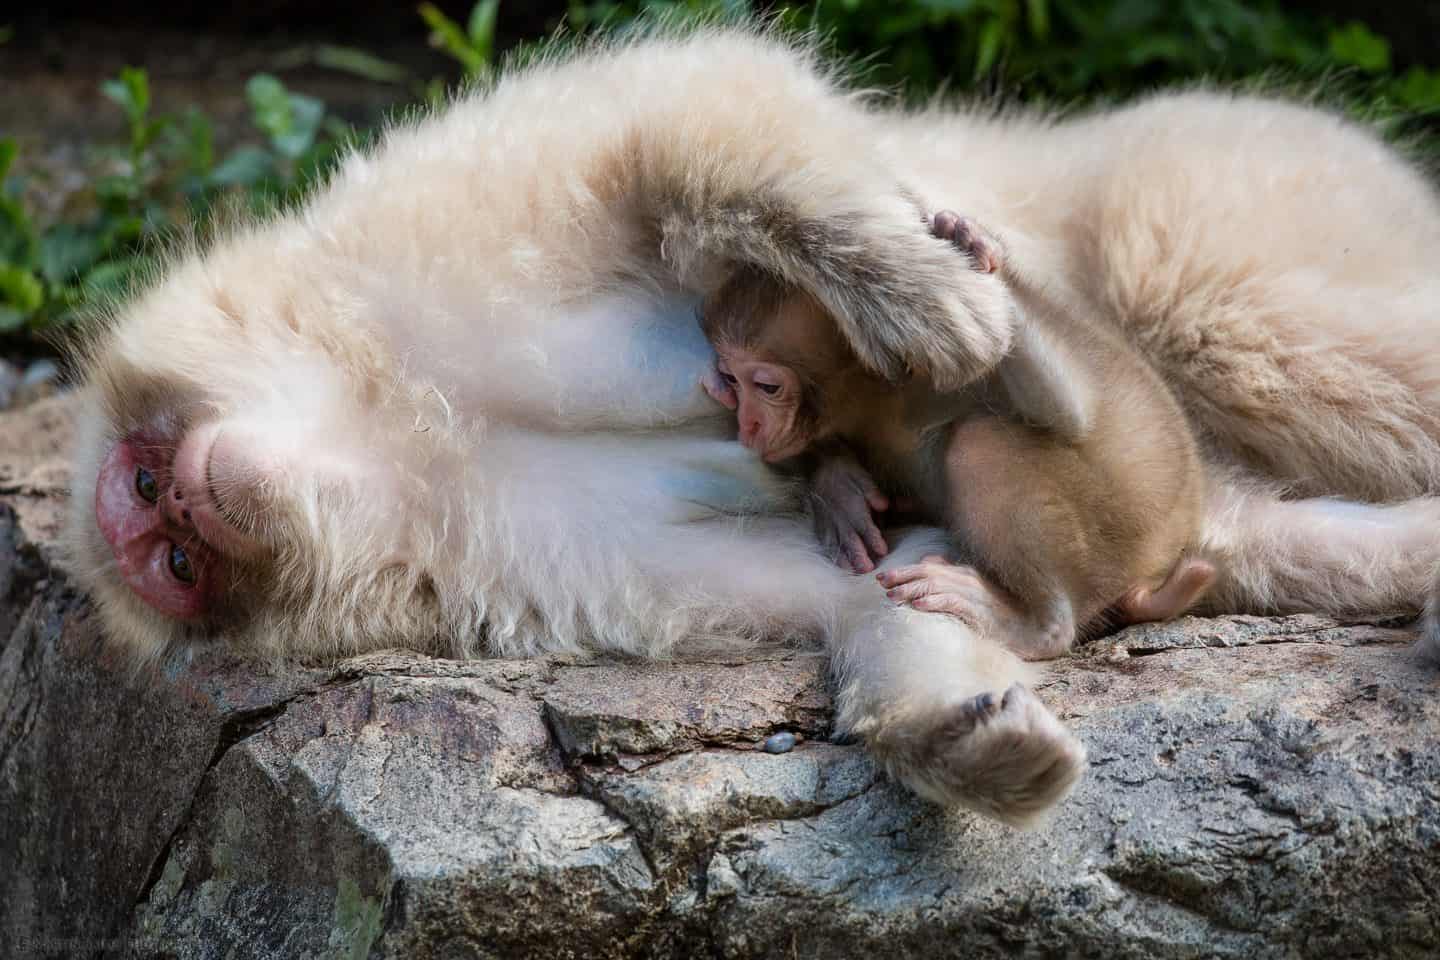 Baby Snow Monkey Feeding as Mother Lays Down